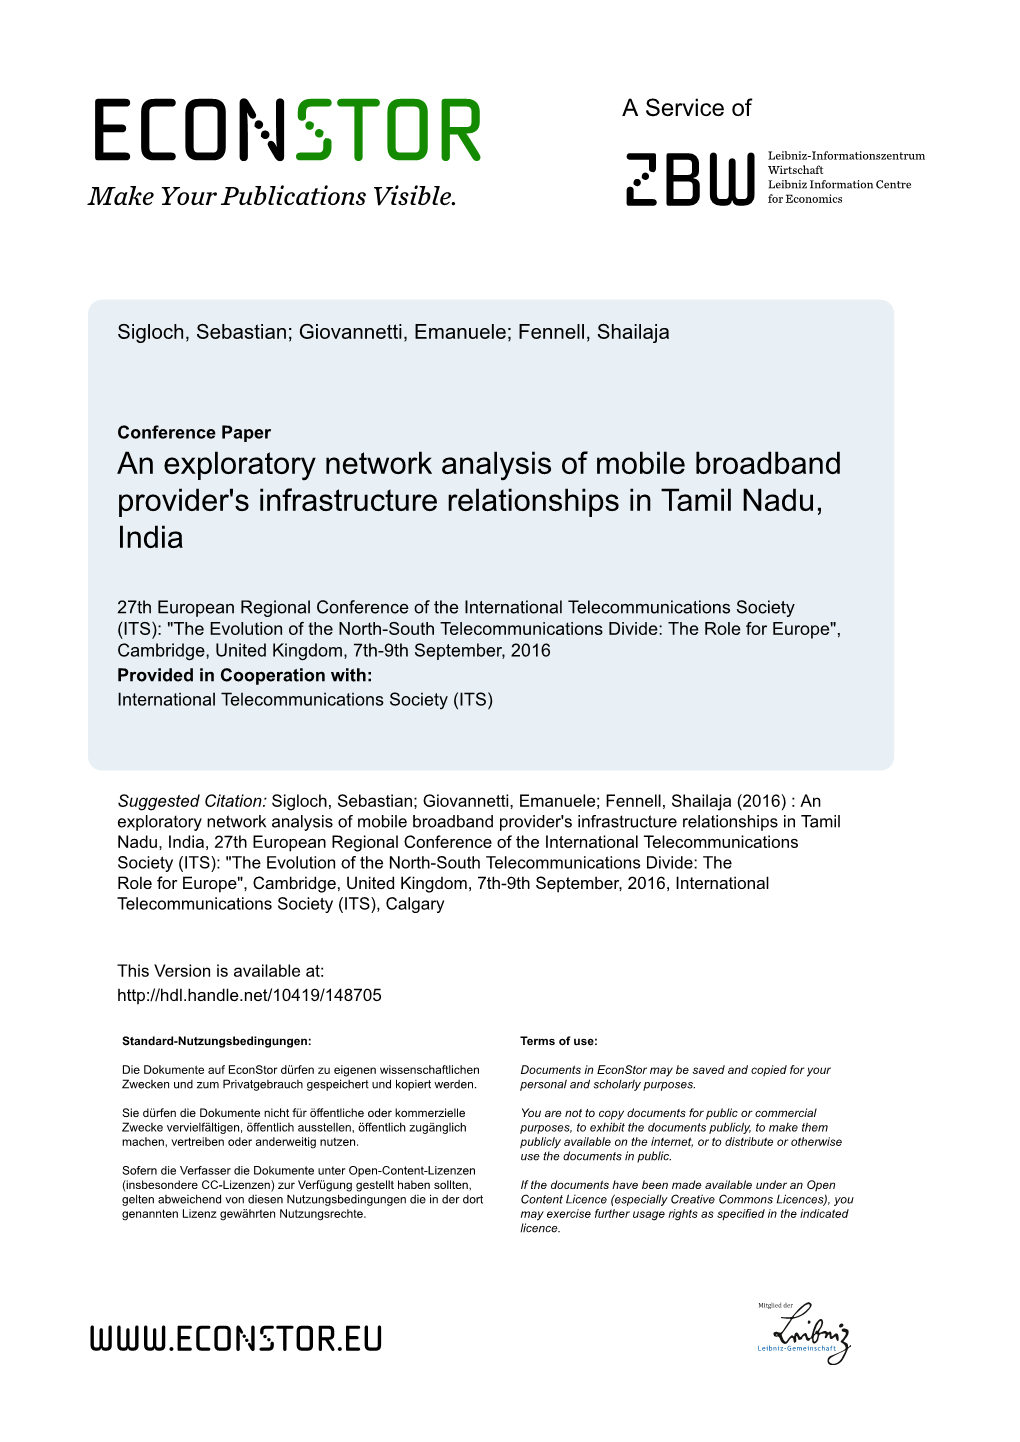 An Exploratory Network Analysis of Mobile Broadband Provider's Infrastructure Relationships in Tamil Nadu, India